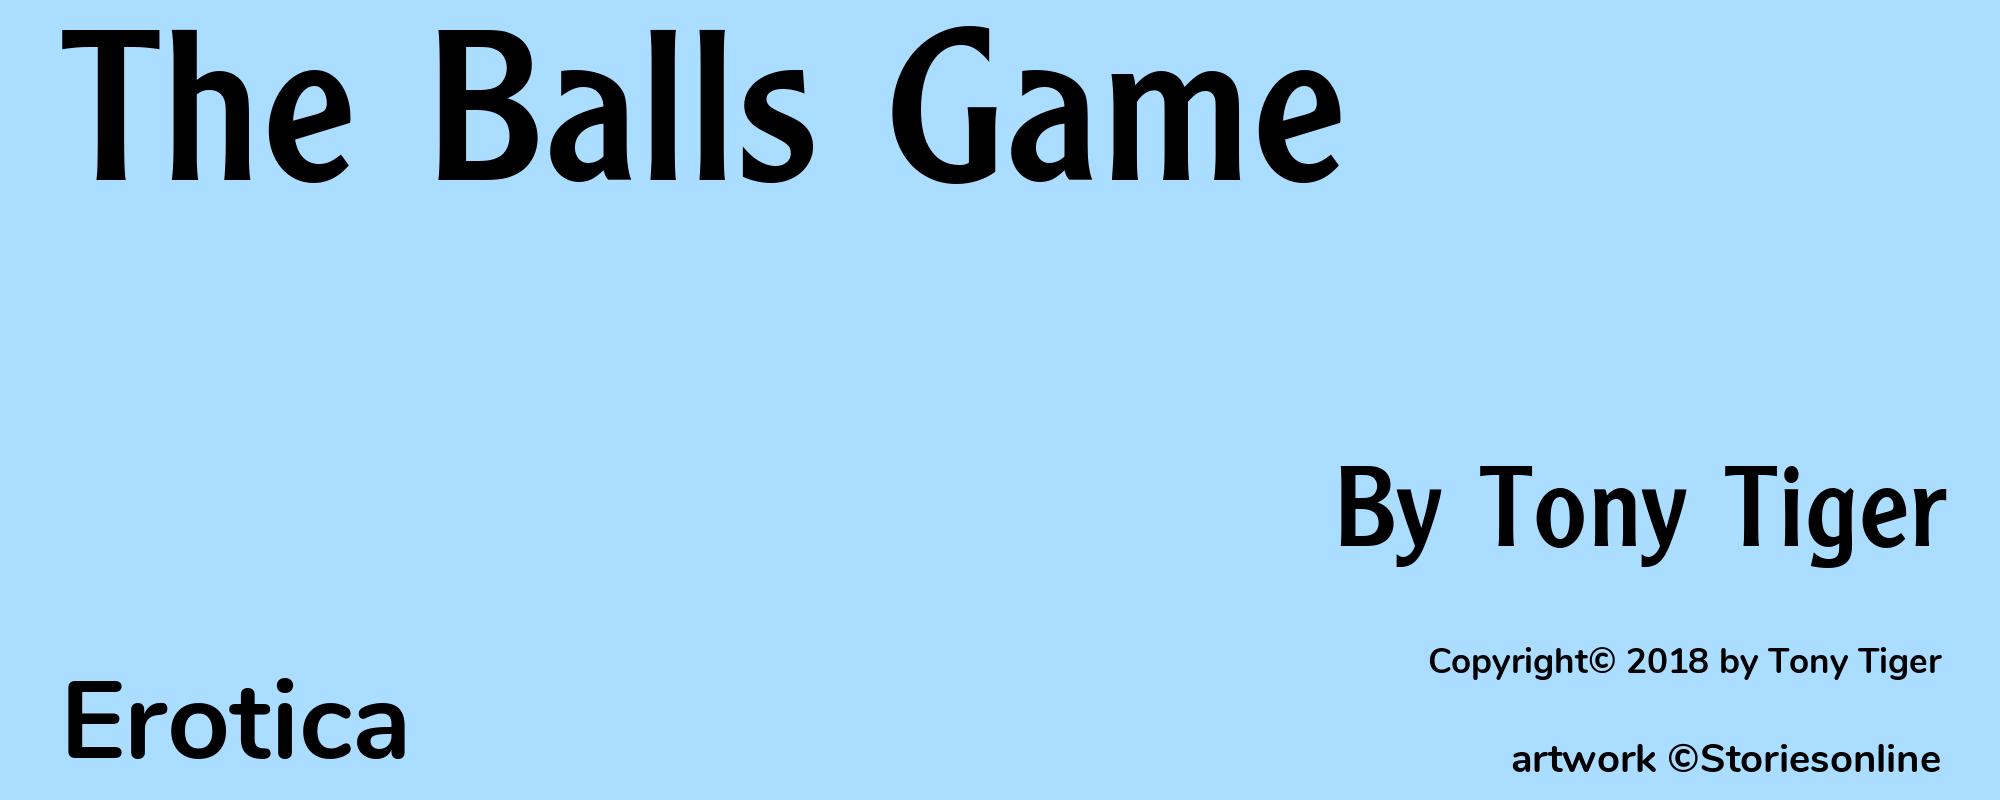 The Balls Game - Cover